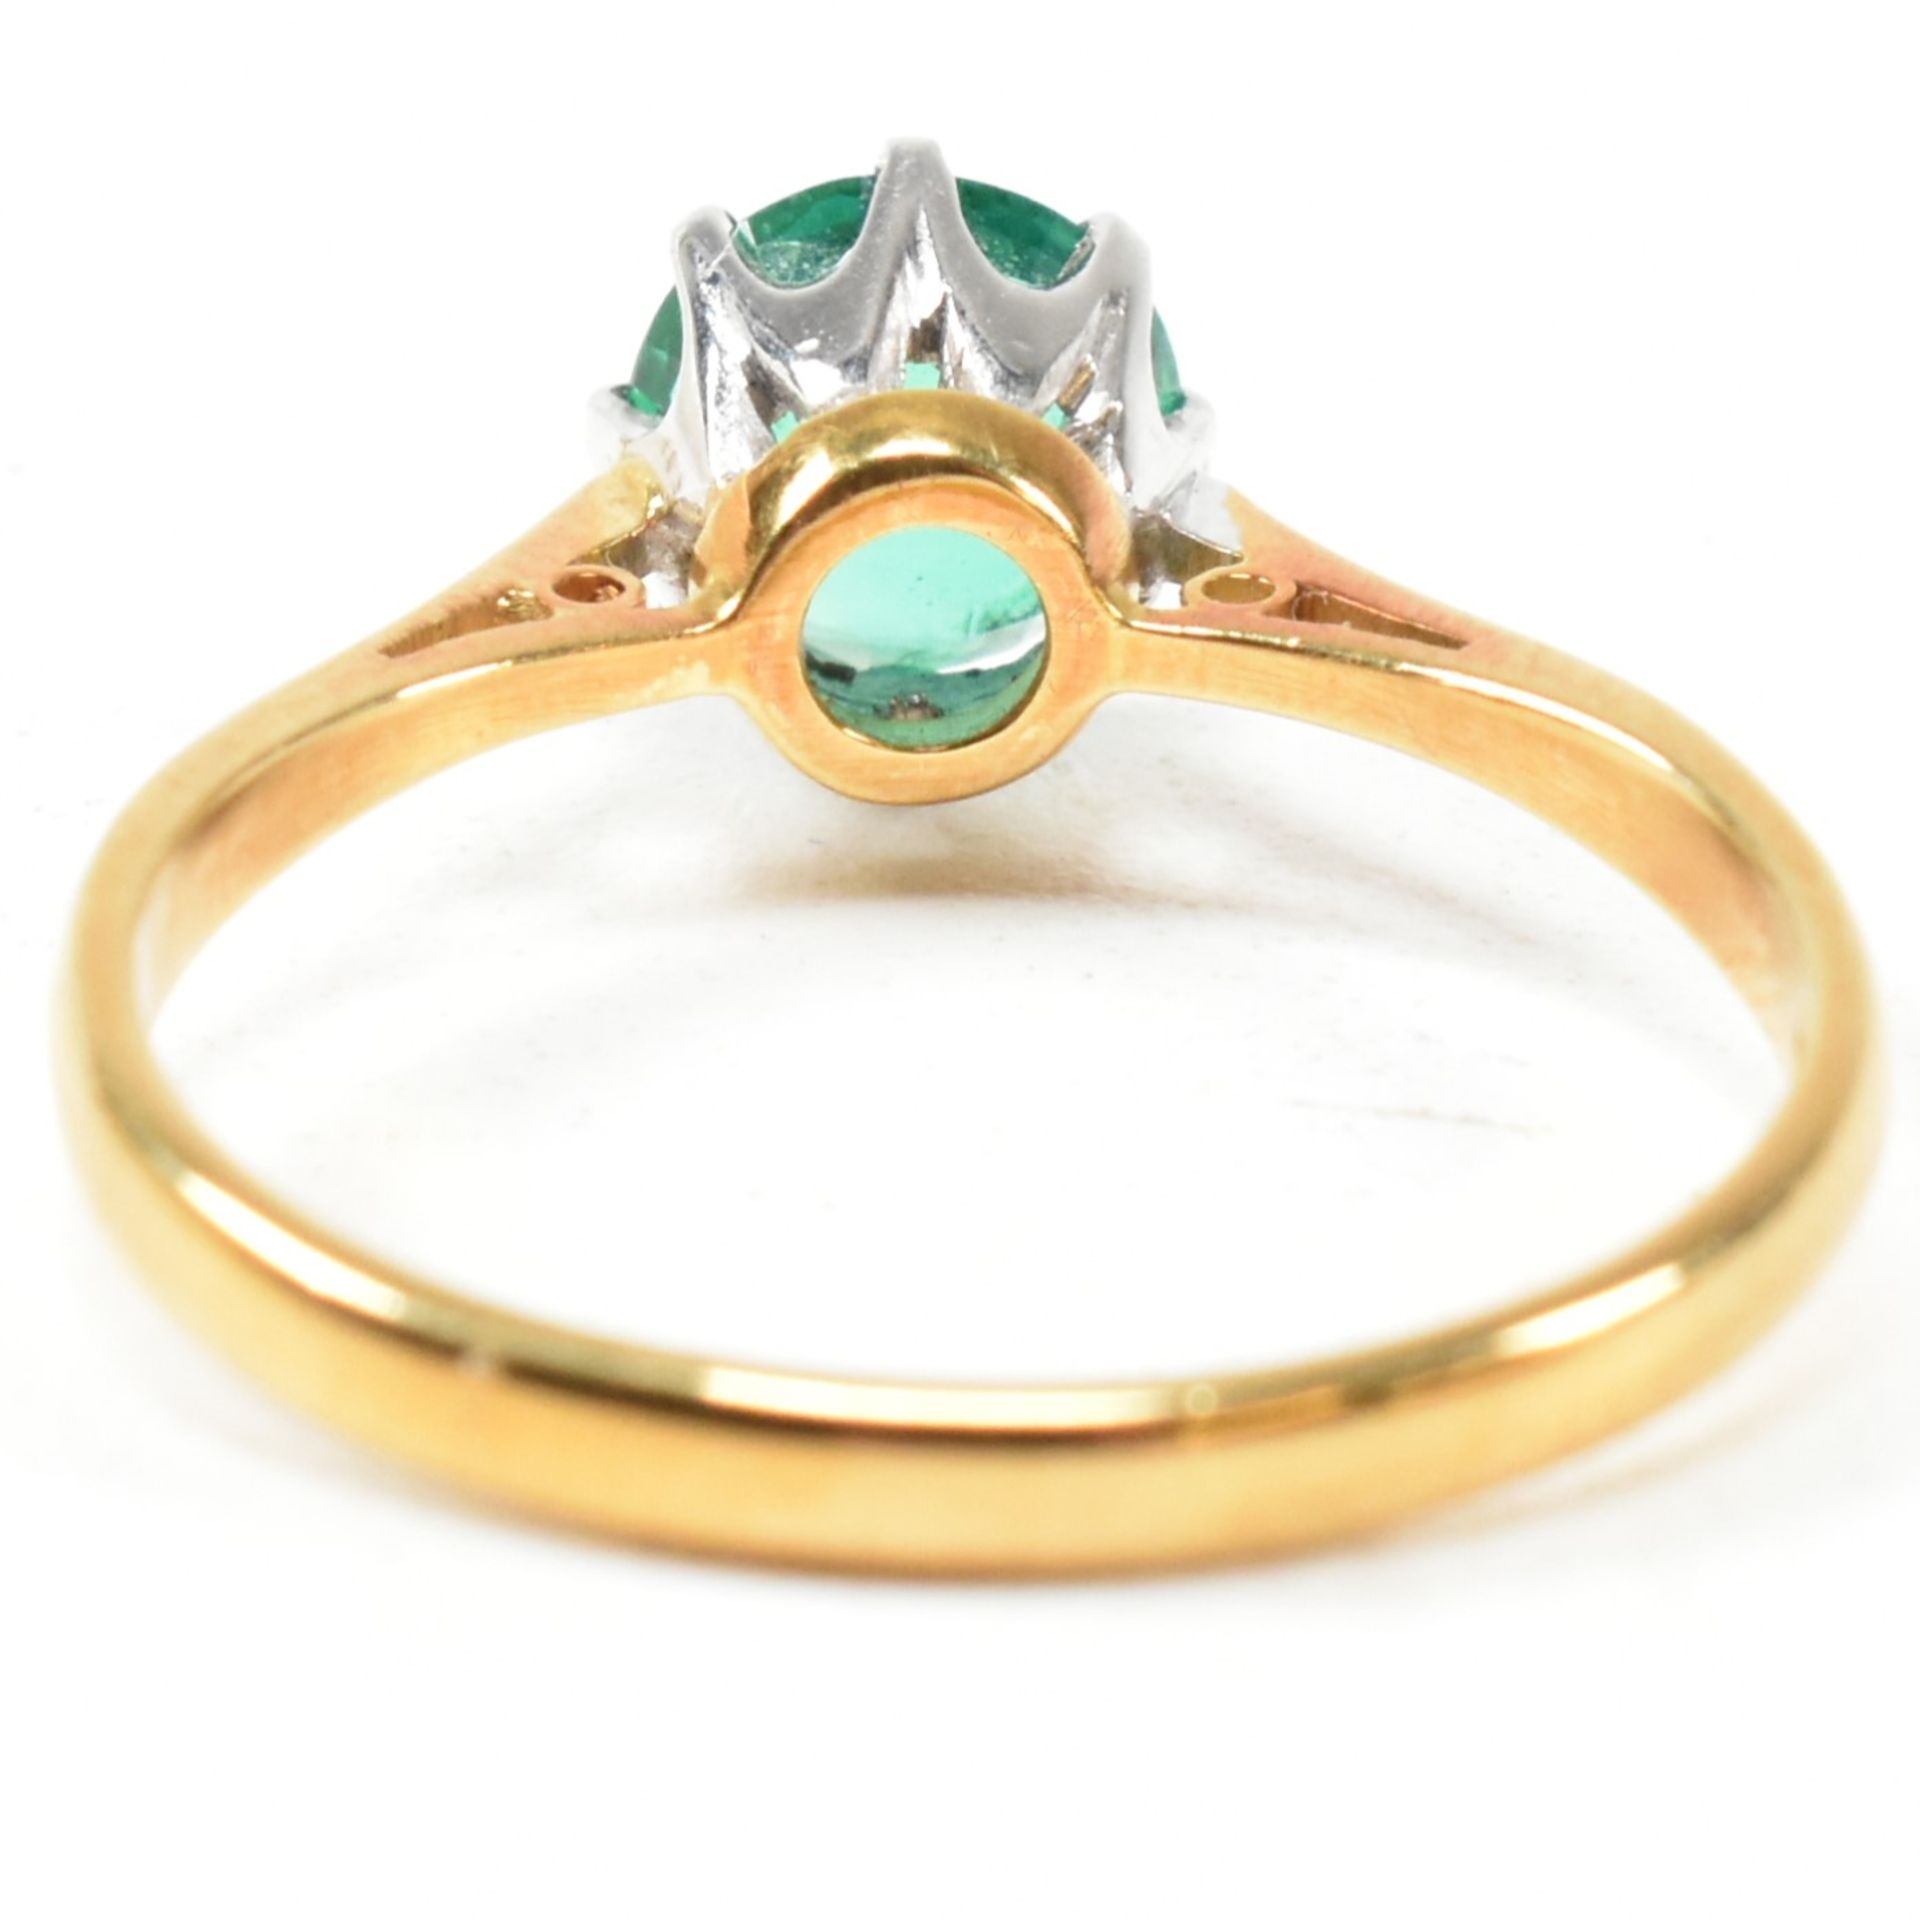 HALLMARKED 18CT GOLD & EMERALD SOLITAIRE RING - Image 2 of 10